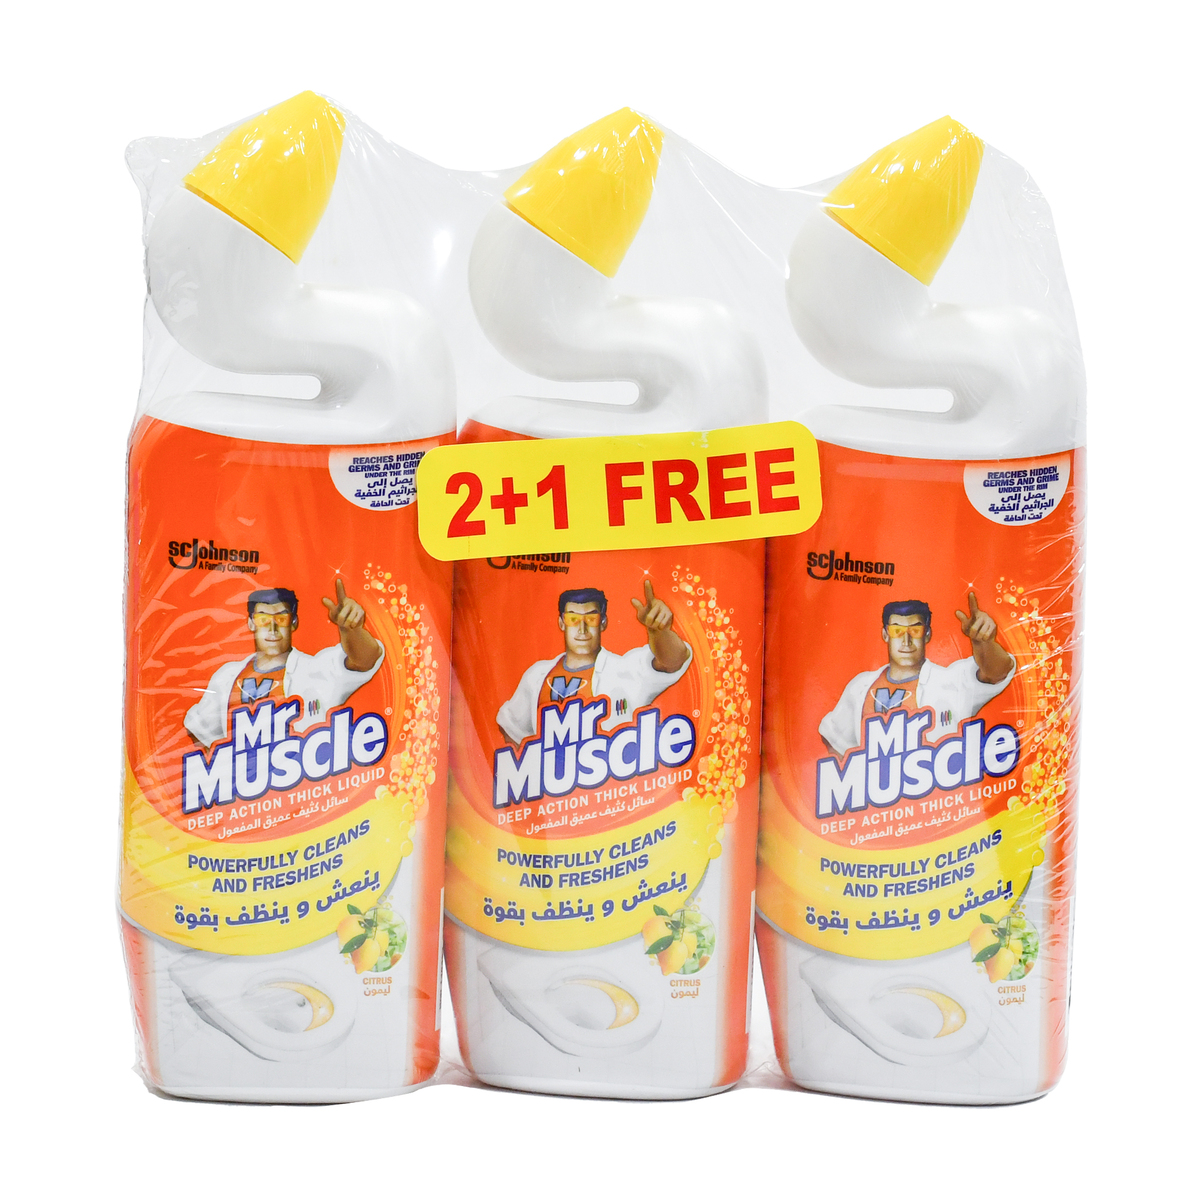 Mr. Muscle Deep Action Toilet Cleaner Citrus 750 ml 2+1 Free